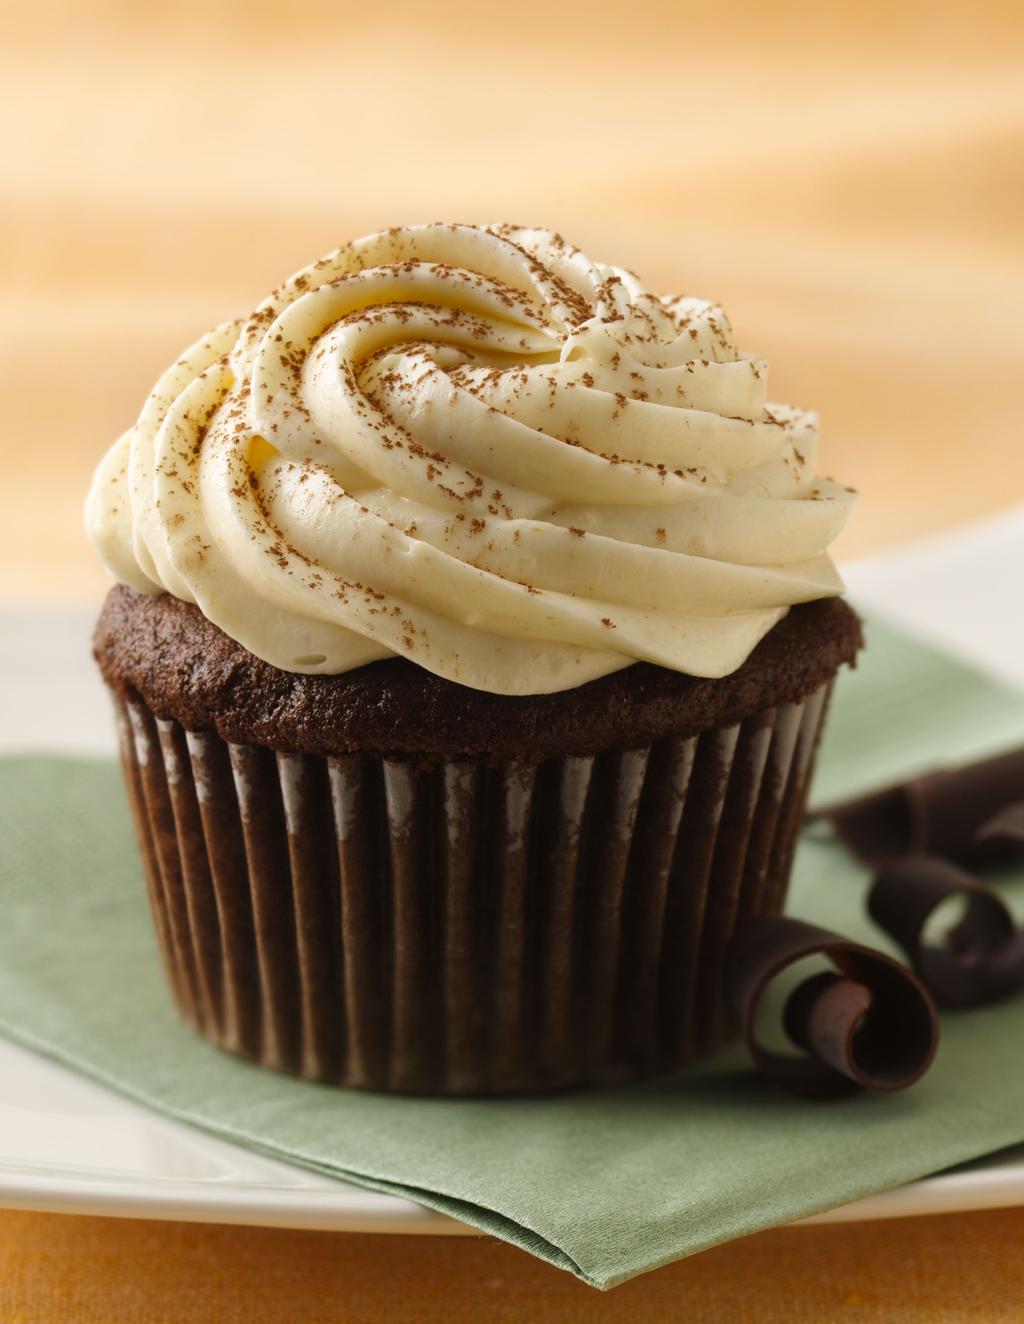 Chocolate Guinness Cupcakes In a tasty marriage of food and drink, beer and chocolate combine in a distinctive cupcake with cream cheese icing.